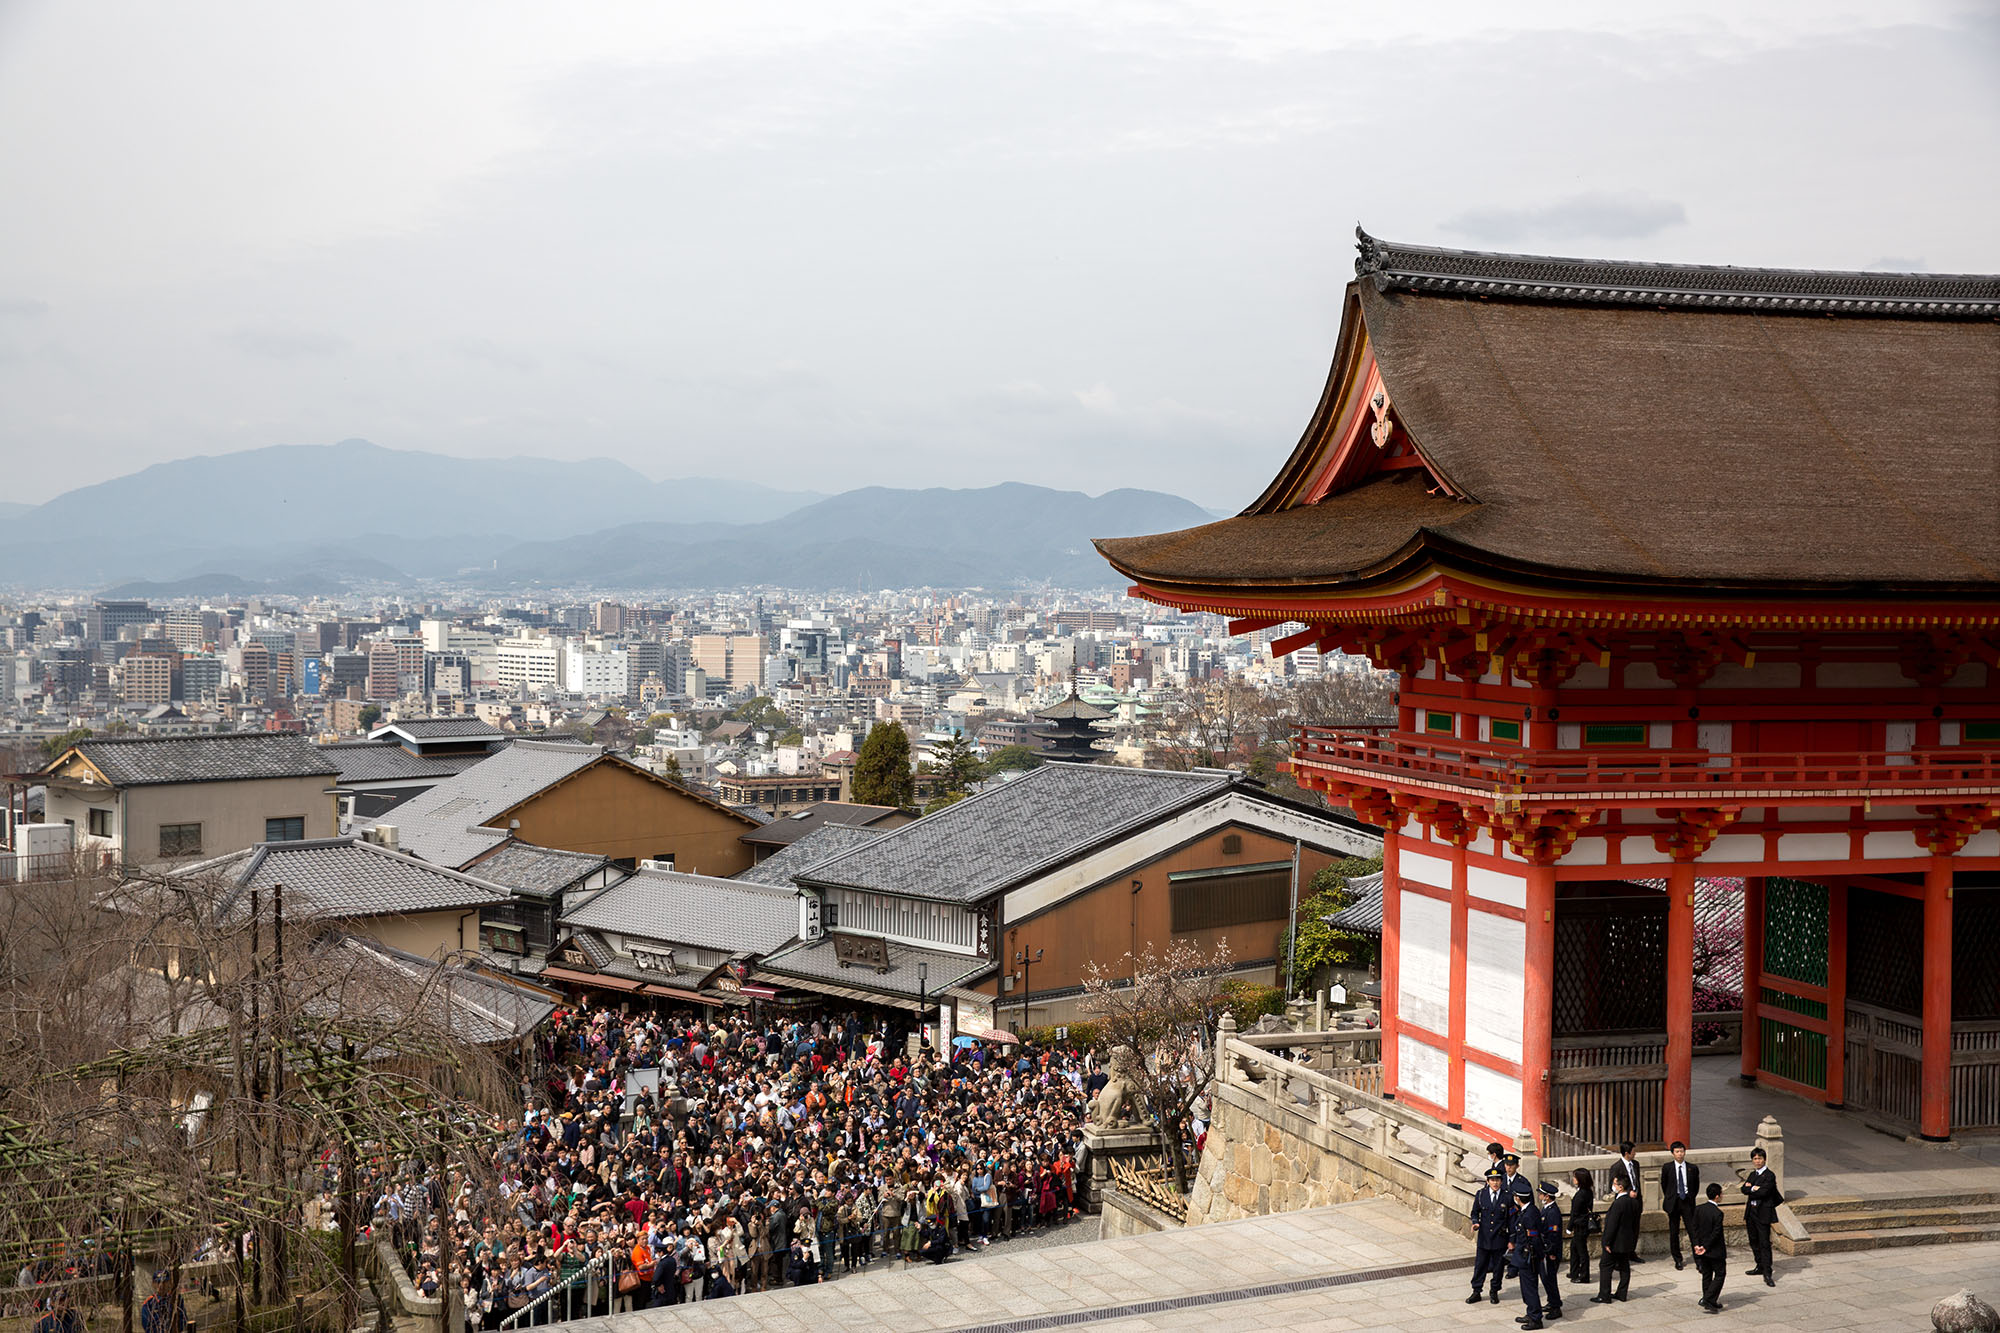 First Lady Michelle Obama visits Kyoto during her trip to Japan. (Official White House Photo by Amanda Lucidon)